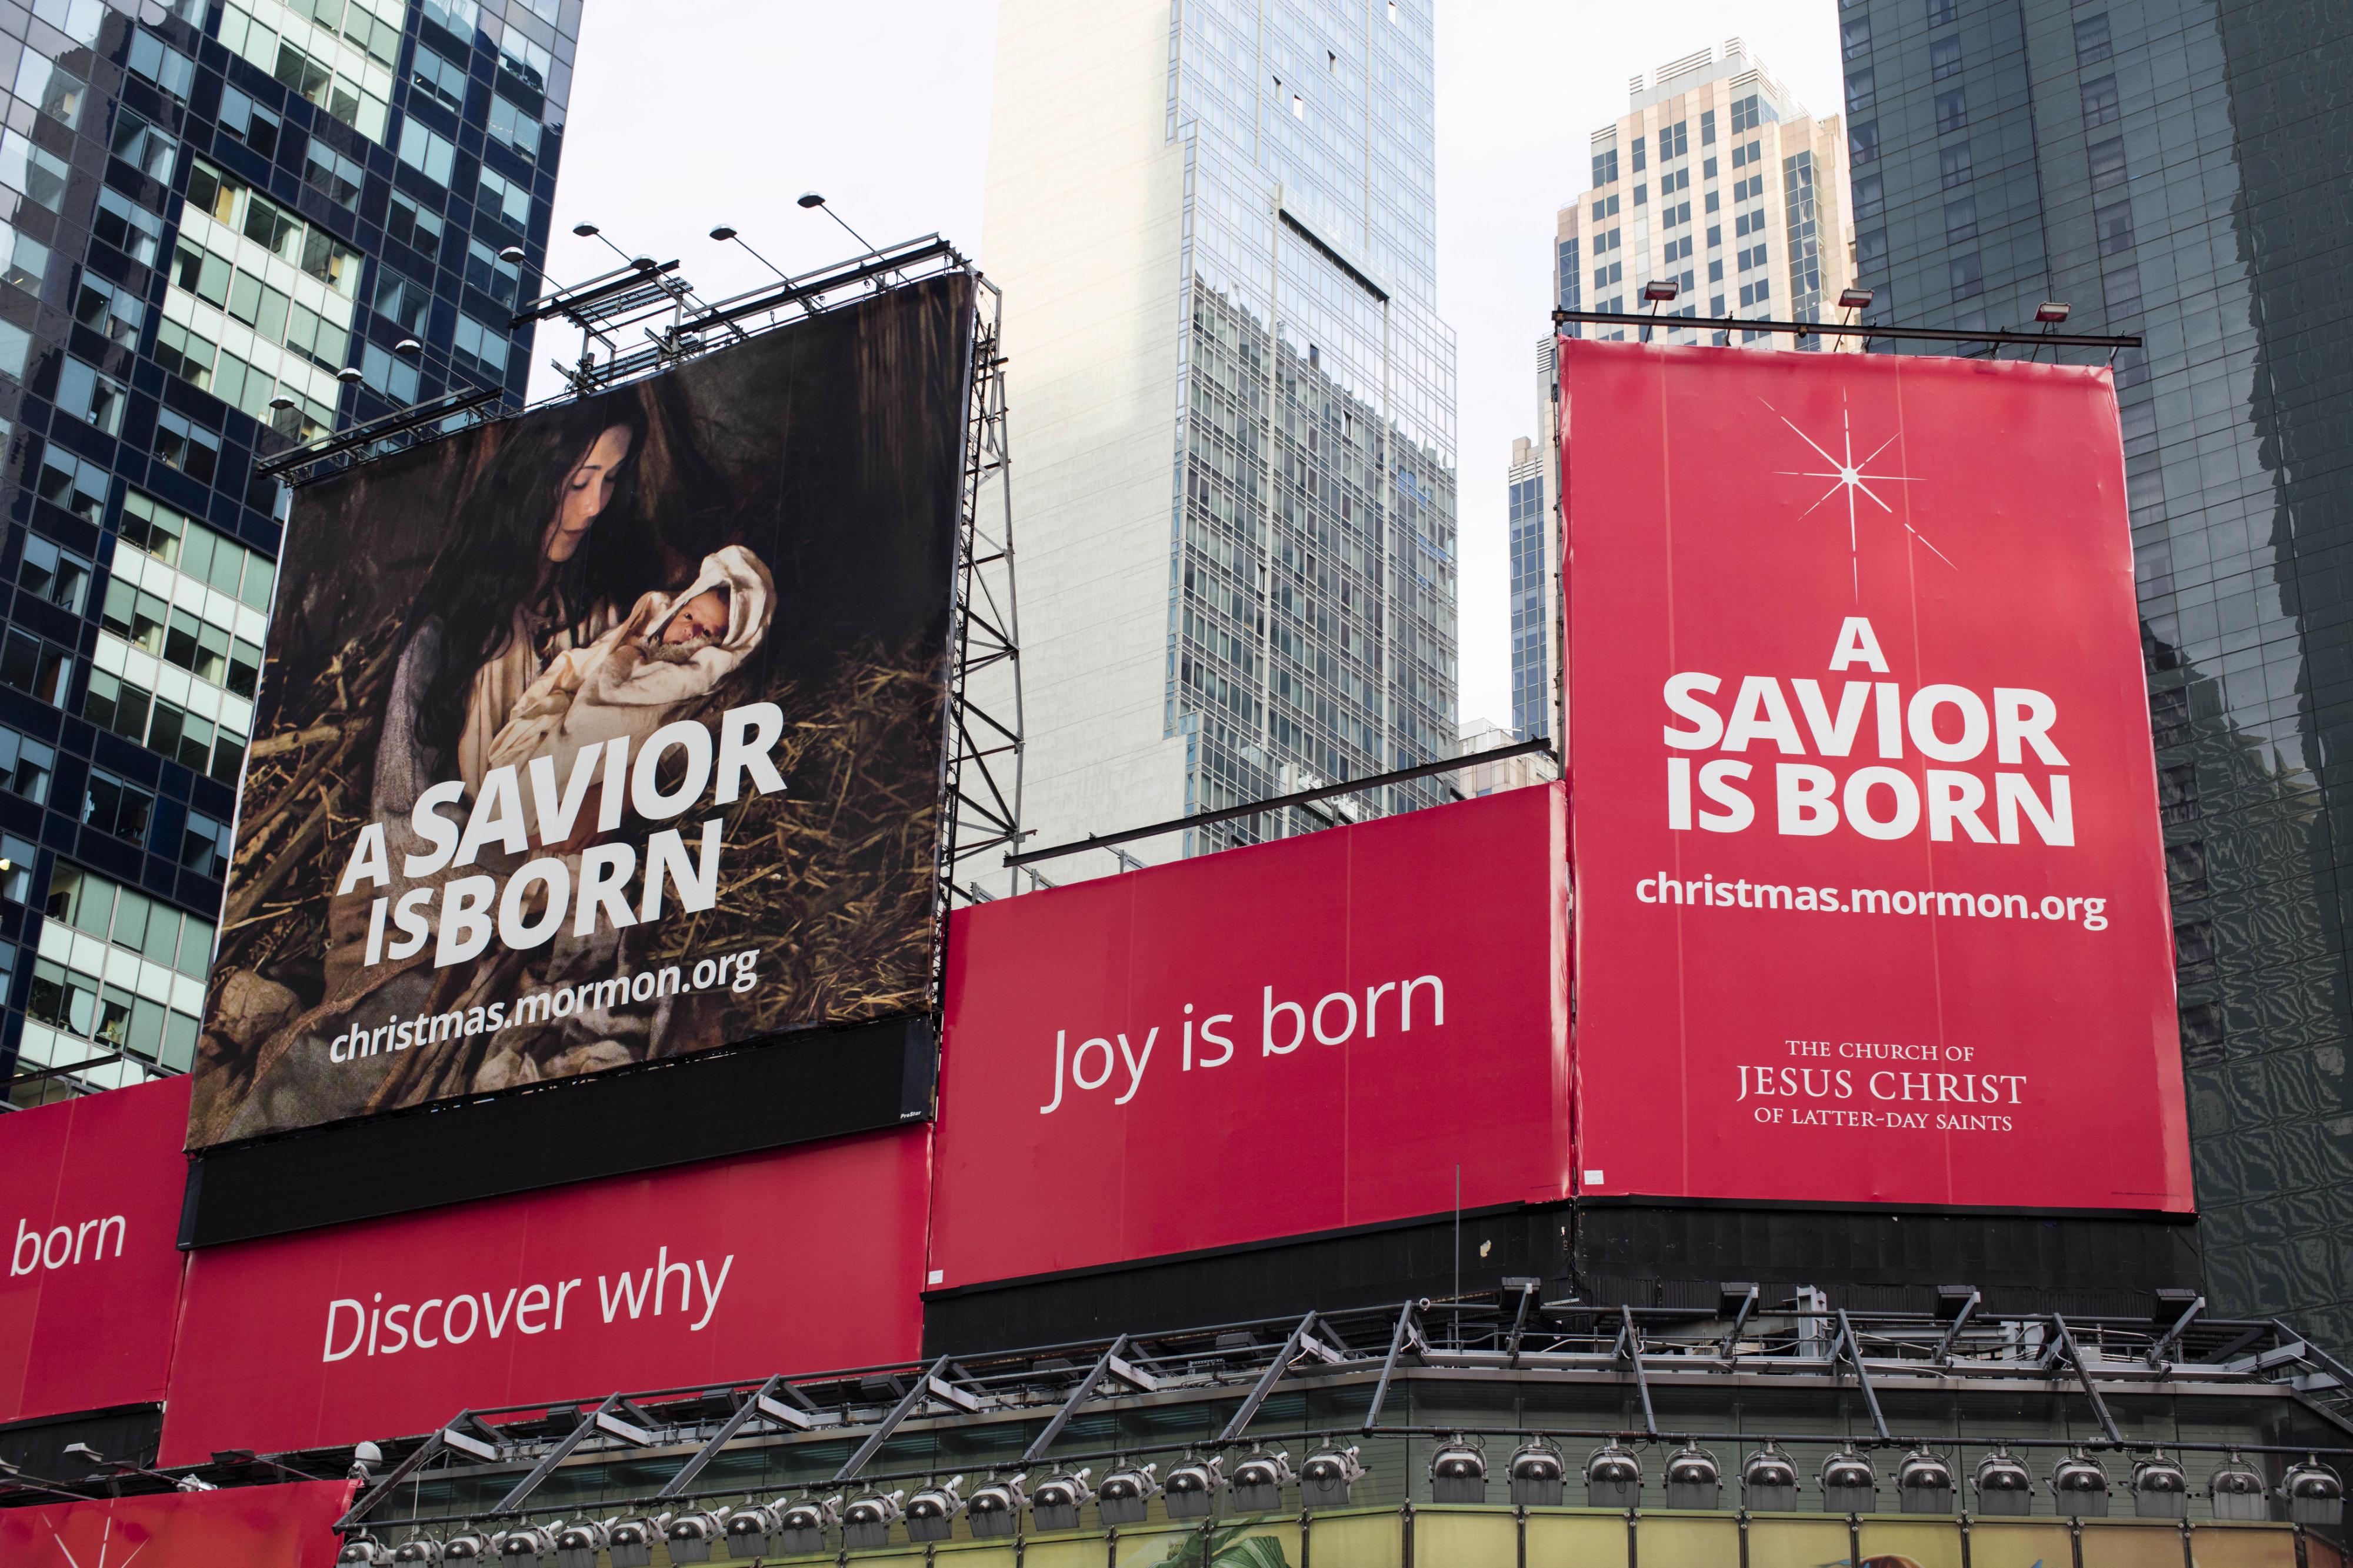 “A Savior Is Born” Christmas Images in New York’s Times Square LDS365